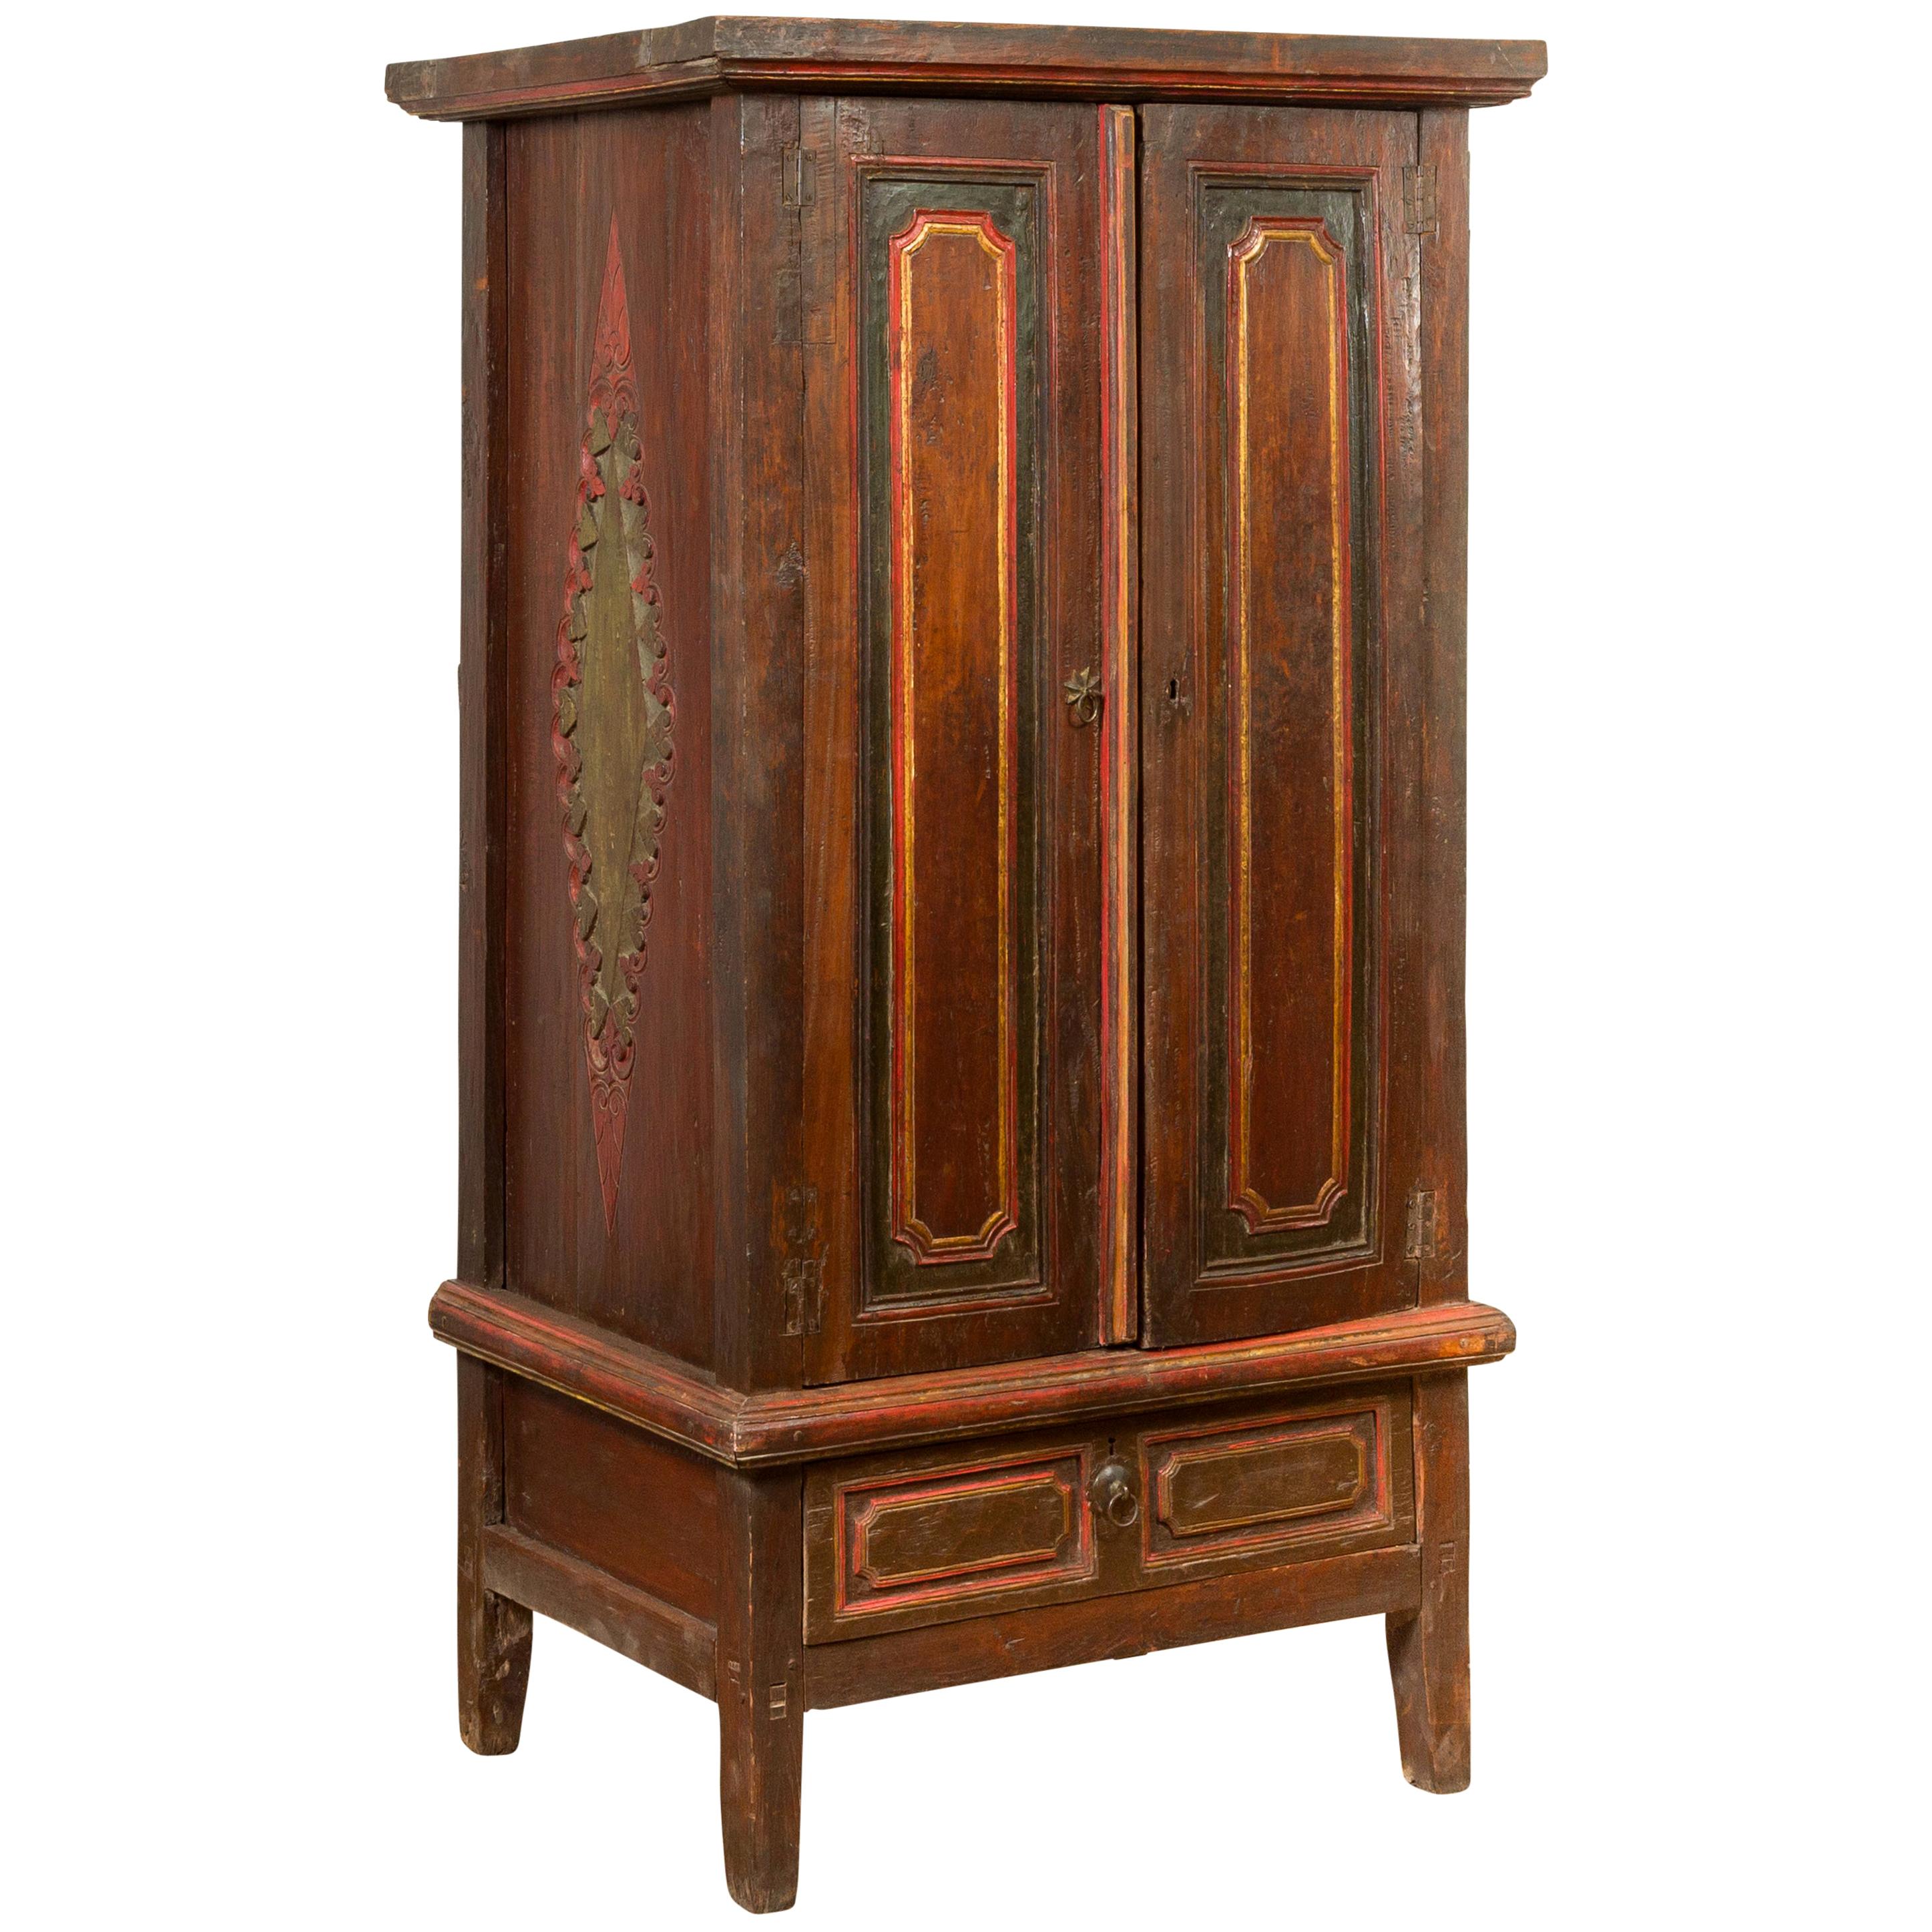 Dutch Colonial 19th Century Cabinet with Polychrome Finish and Carved Sides